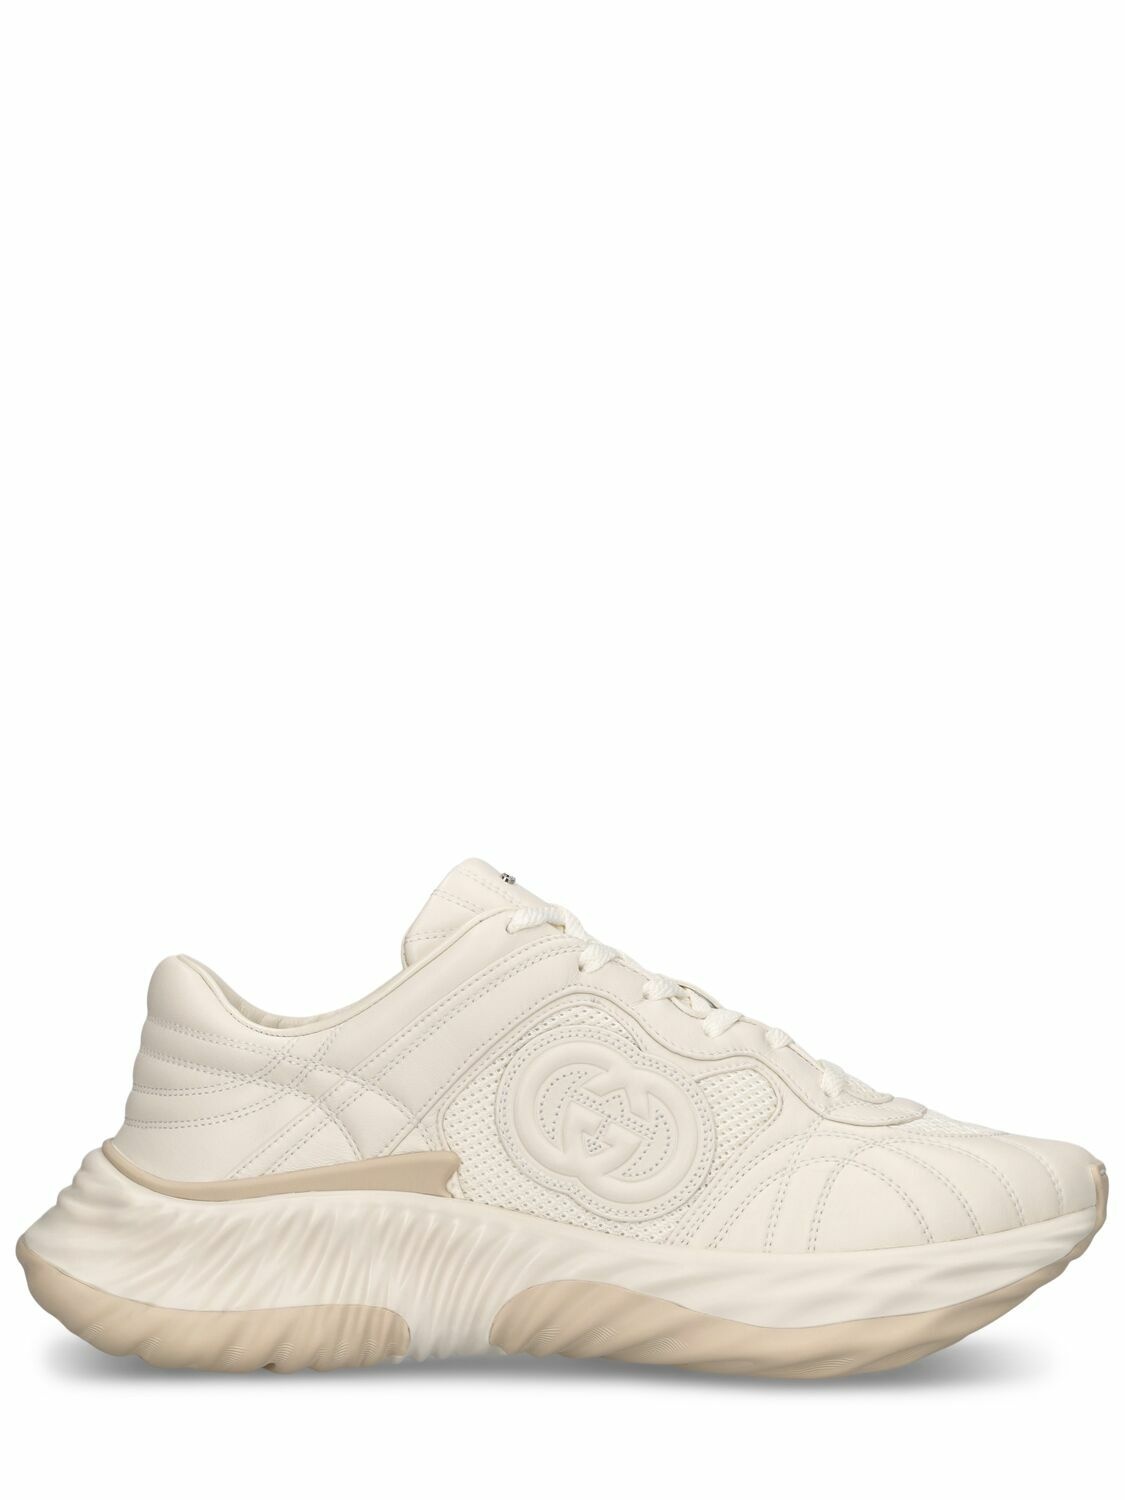 Photo: GUCCI Gg Ripple Tech & Leather Sneakers